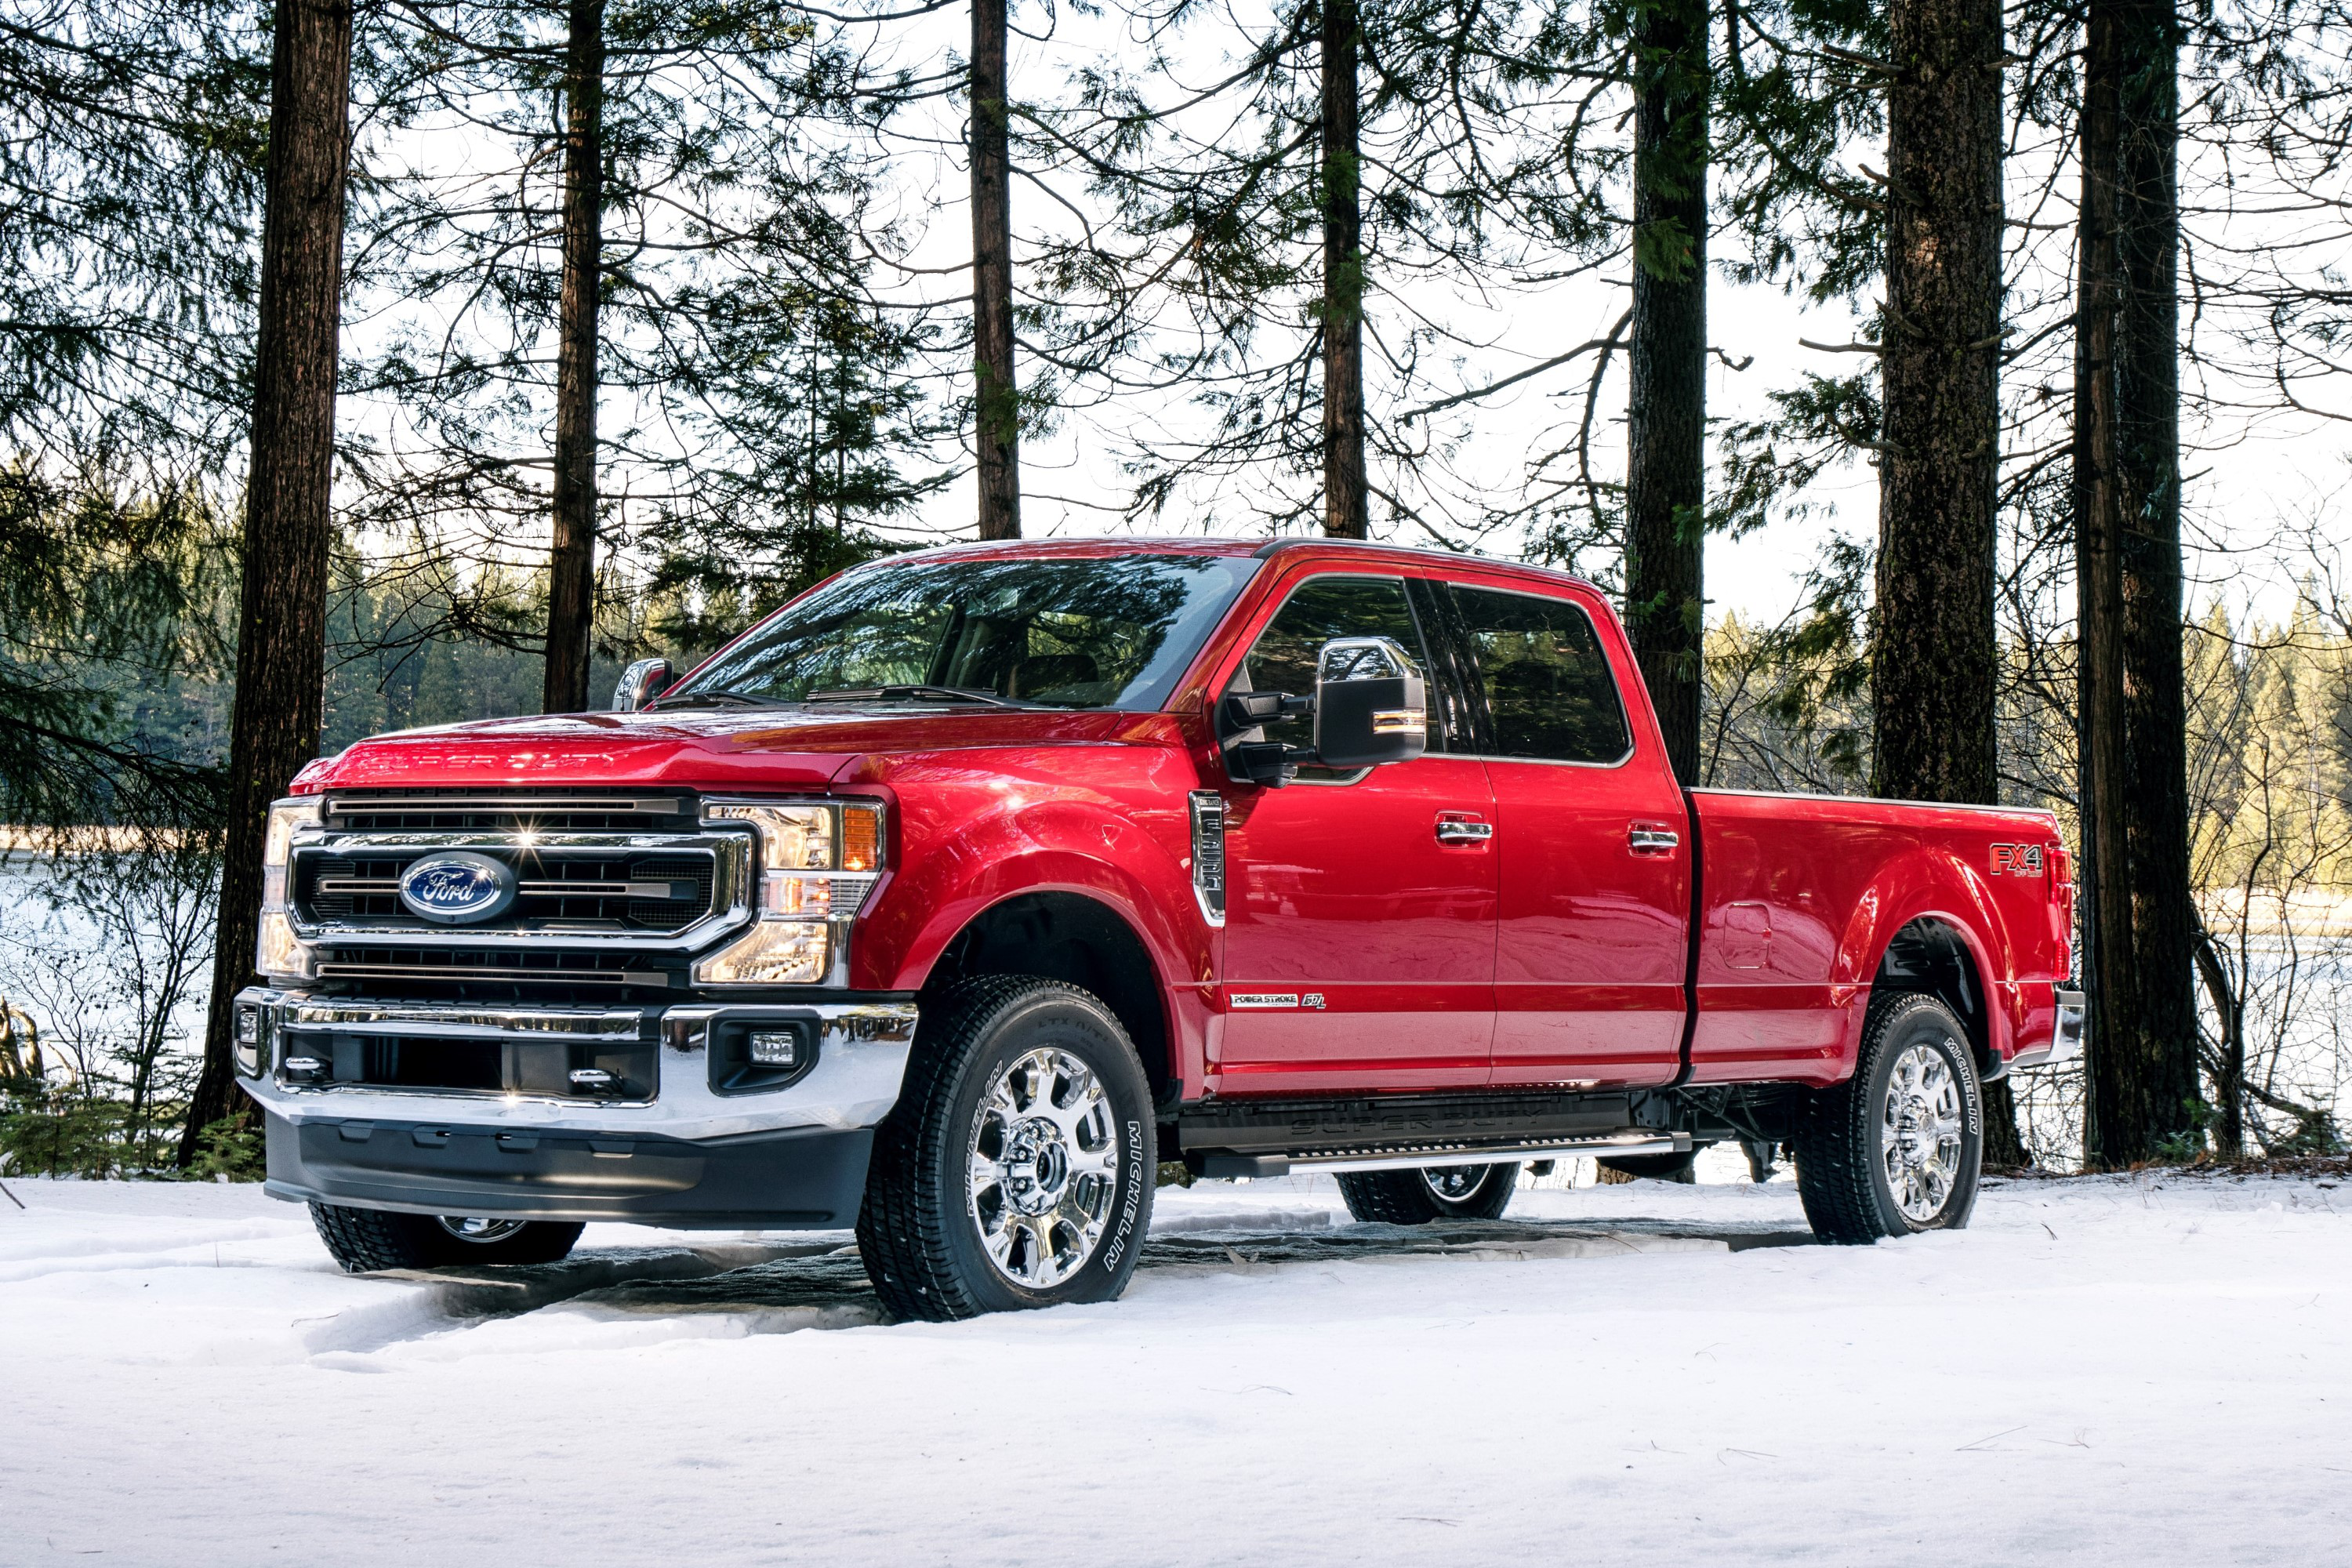 Ford introduces new Super Duty trucks with gas V8 option | Equipment World